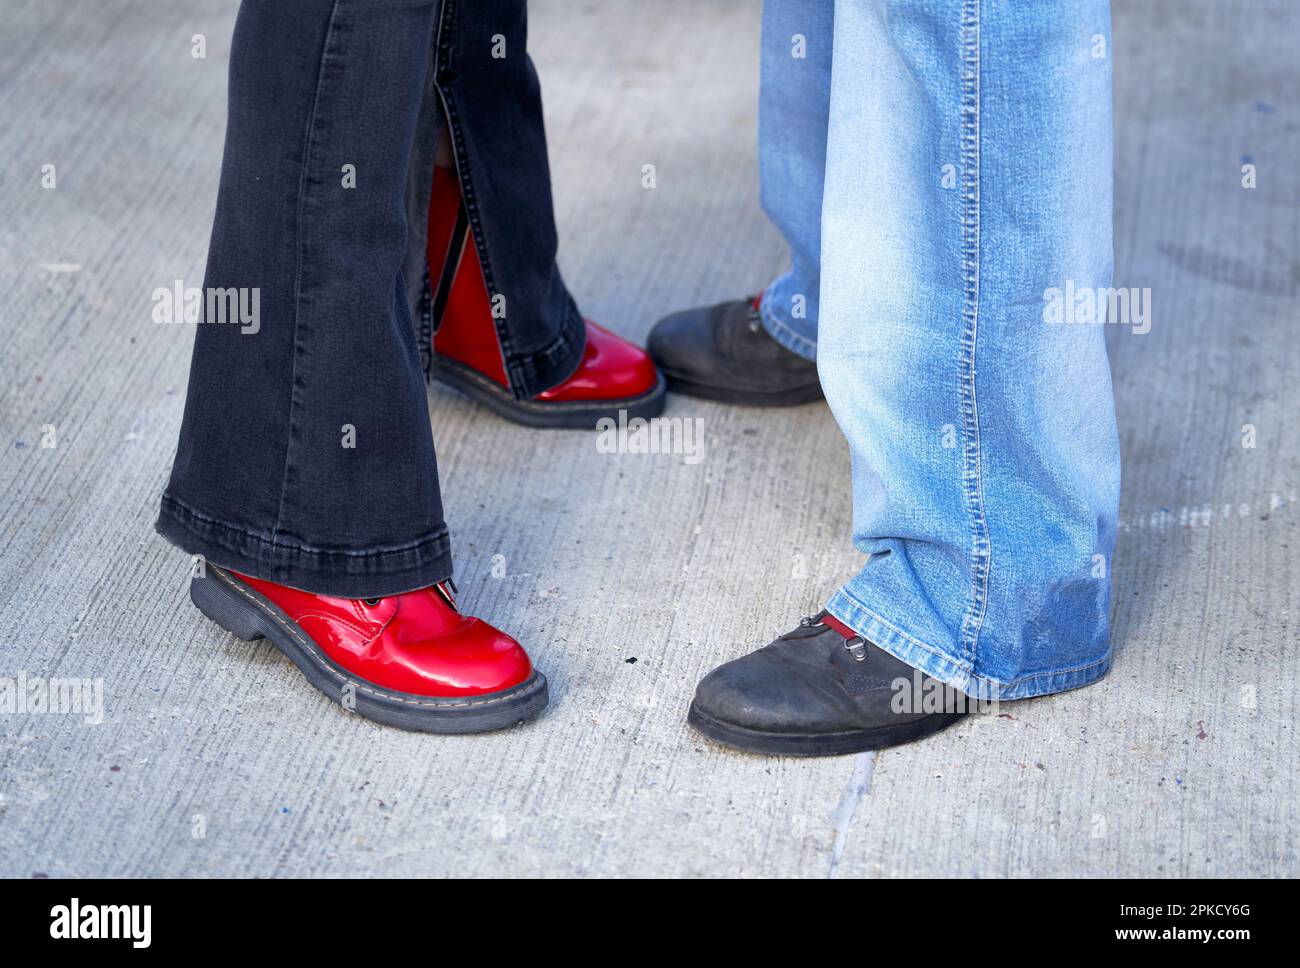 Man's and woman's feet in jeans and boots Stock Photo